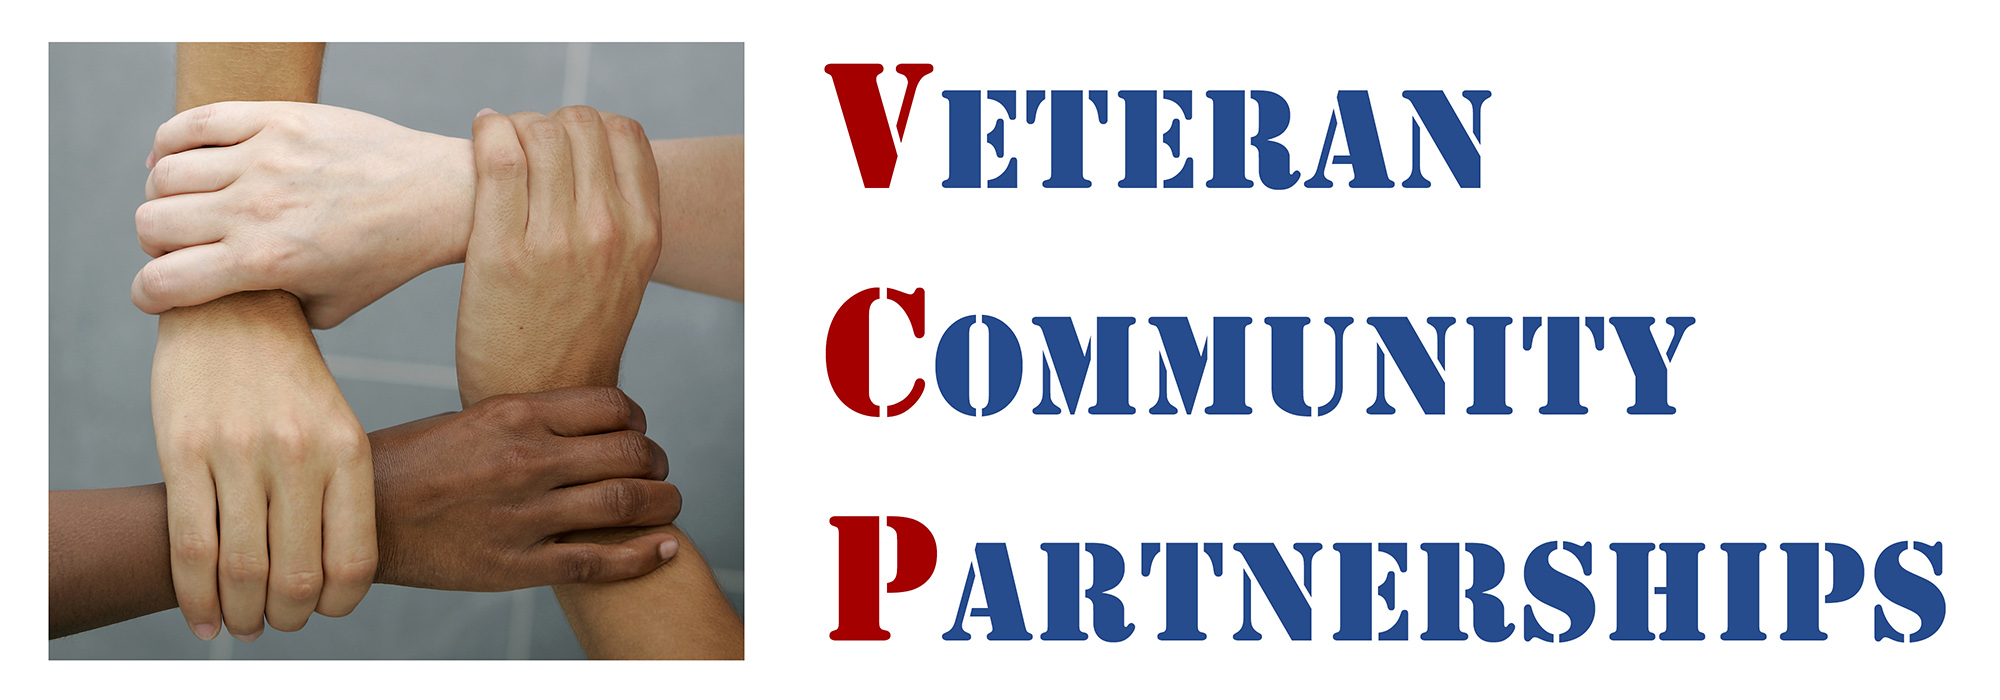 Veteran Community Partnerships Header. Four diverse hands joined hand to wrist in a square with Veteran Community Partnerships spelled out on the right side.